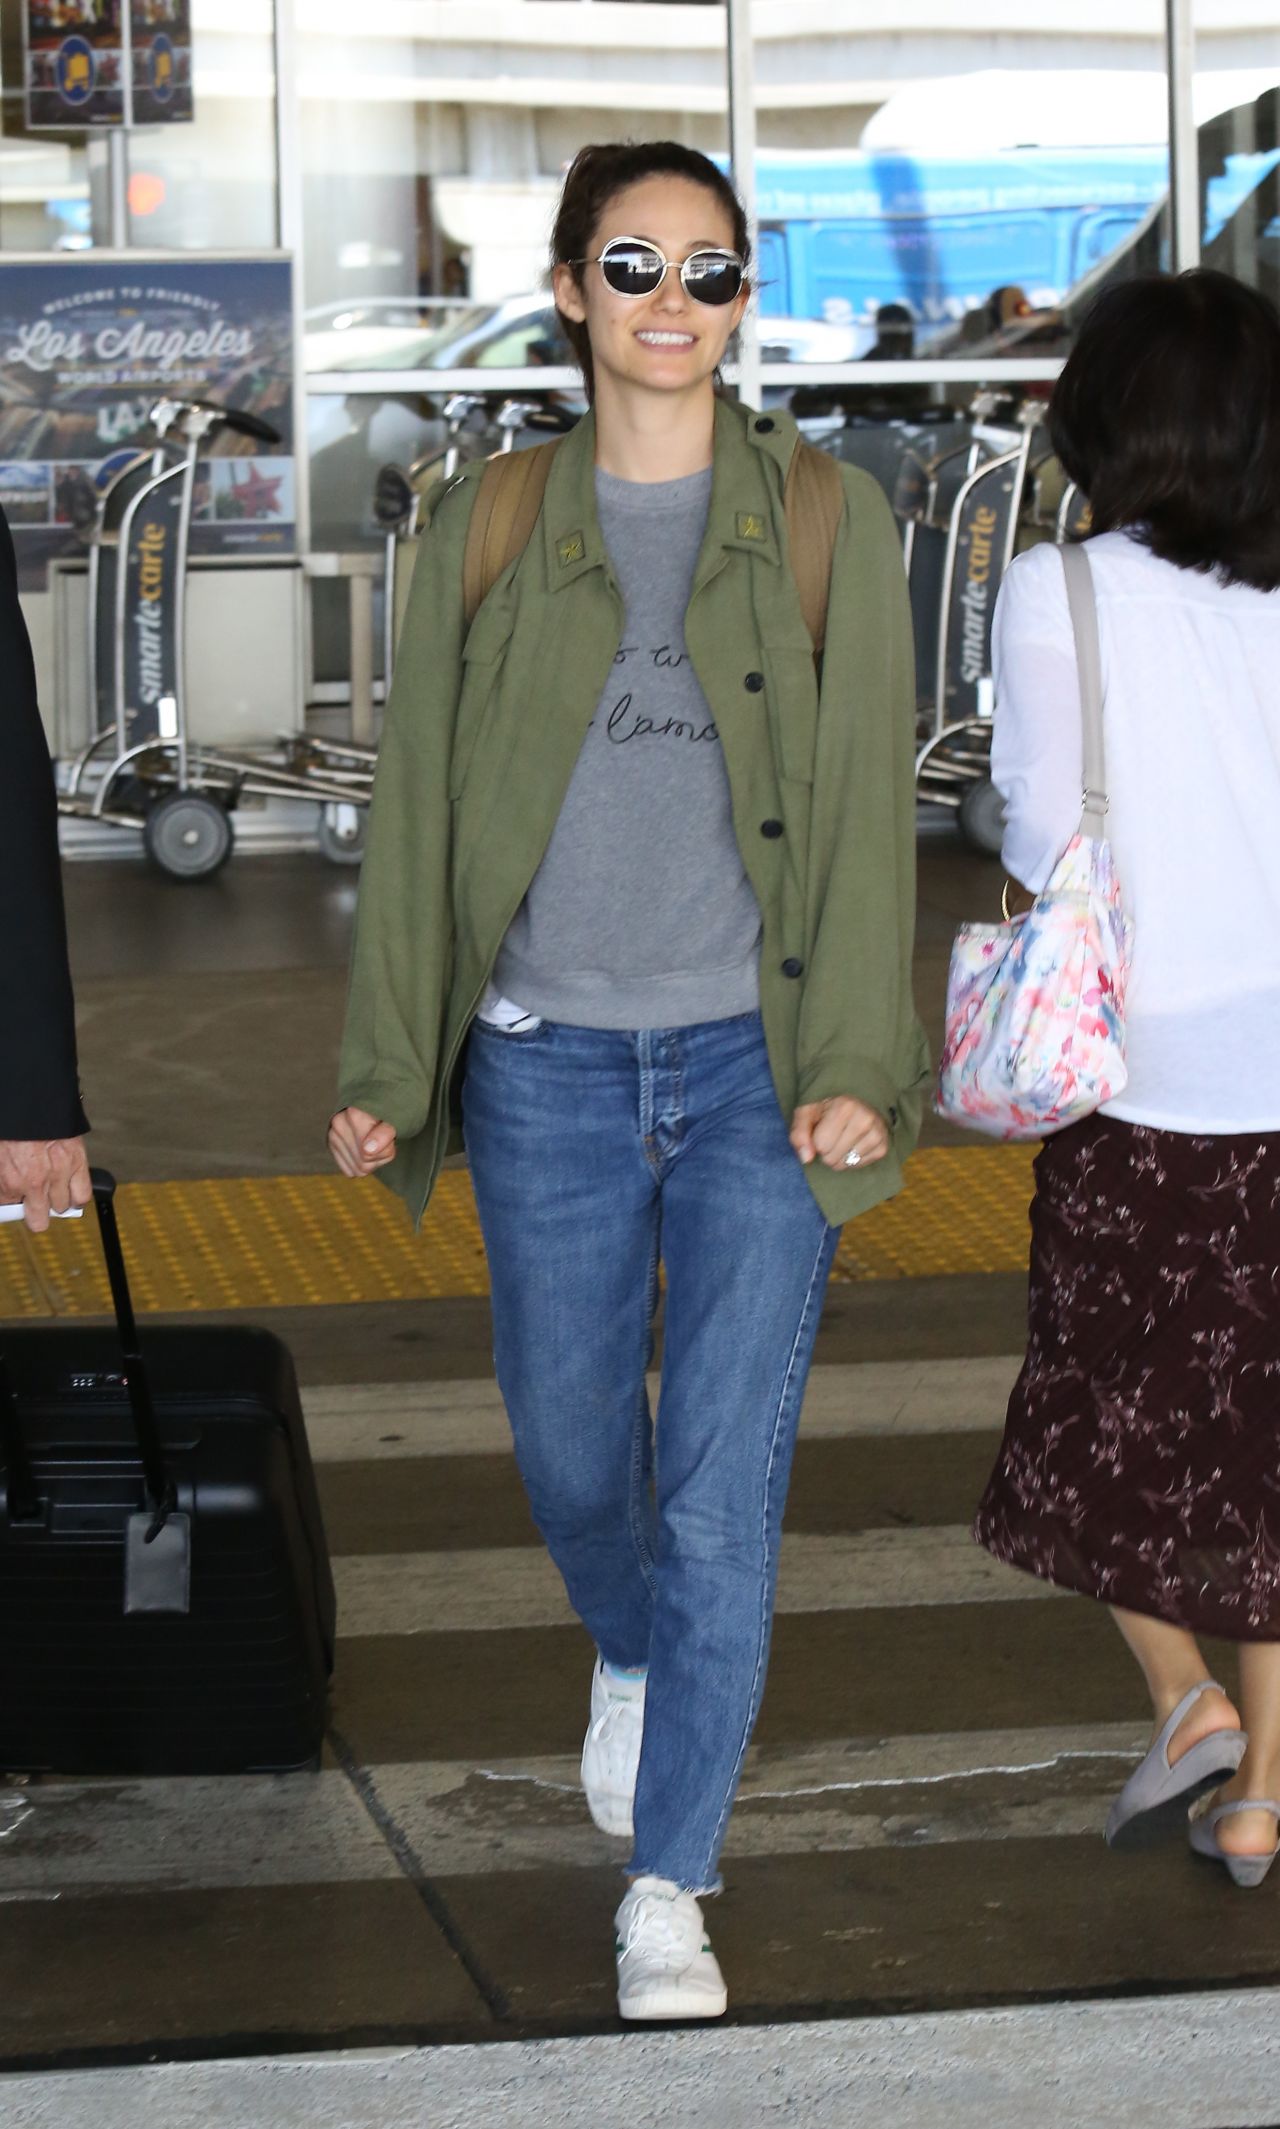 Emmy Rossum in Travel Outfit - LAX in LA 08/05/2017 • CelebMafia